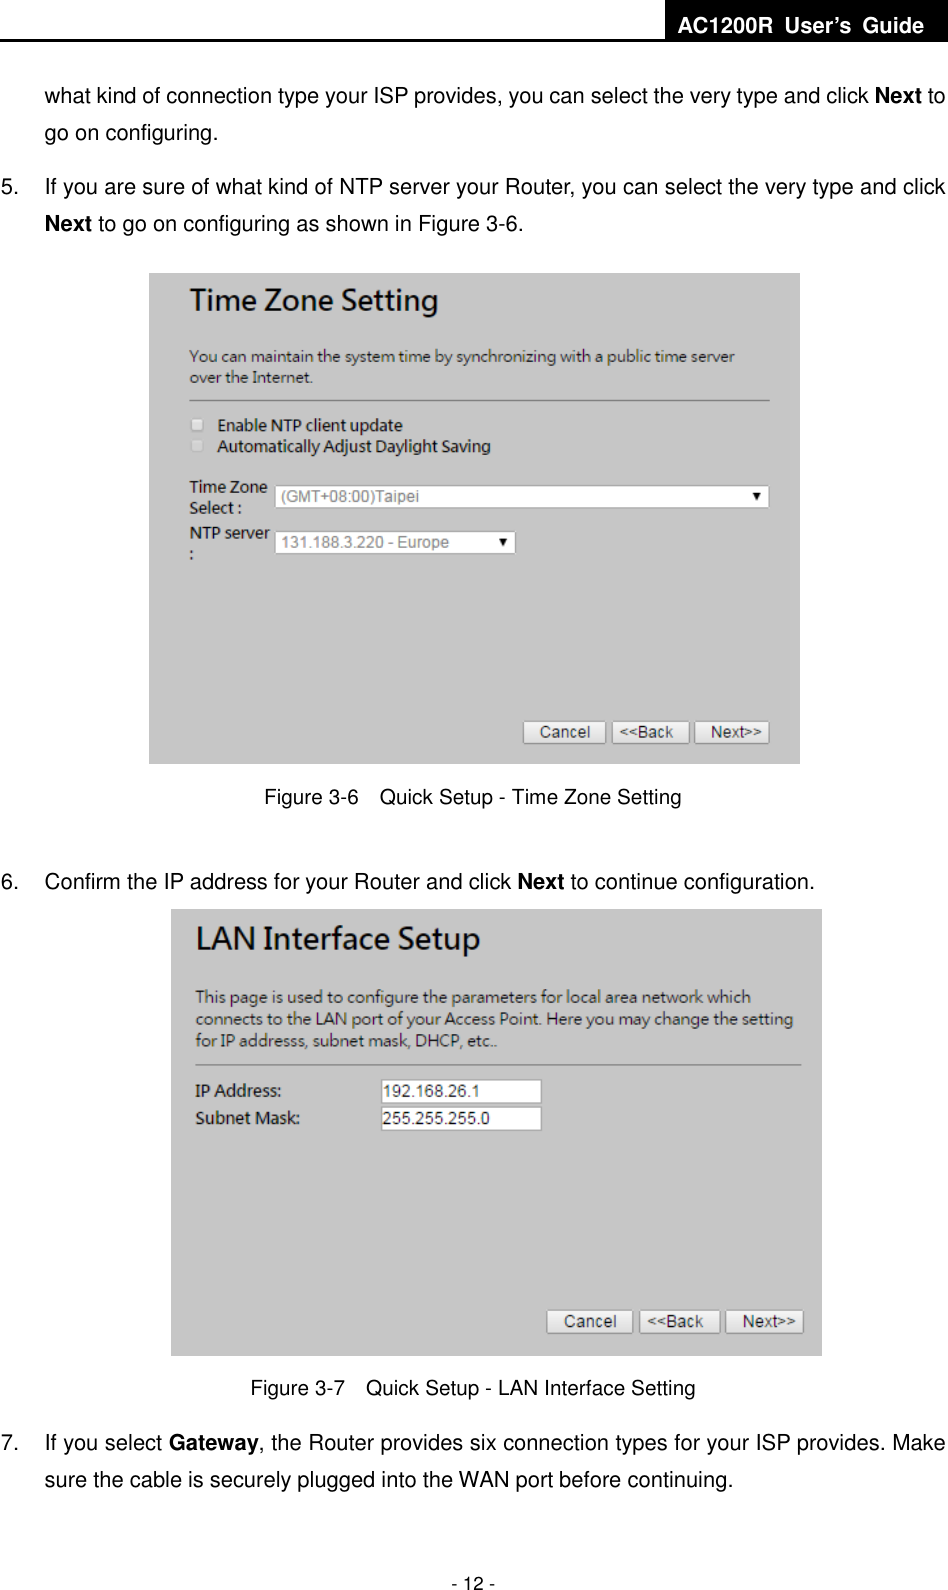  AC1200R  User’s  Guide  - 12 - what kind of connection type your ISP provides, you can select the very type and click Next to go on configuring. 5.  If you are sure of what kind of NTP server your Router, you can select the very type and click Next to go on configuring as shown in Figure 3-6.  Figure 3-6    Quick Setup - Time Zone Setting  6.  Confirm the IP address for your Router and click Next to continue configuration.  Figure 3-7    Quick Setup - LAN Interface Setting 7.  If you select Gateway, the Router provides six connection types for your ISP provides. Make sure the cable is securely plugged into the WAN port before continuing. 